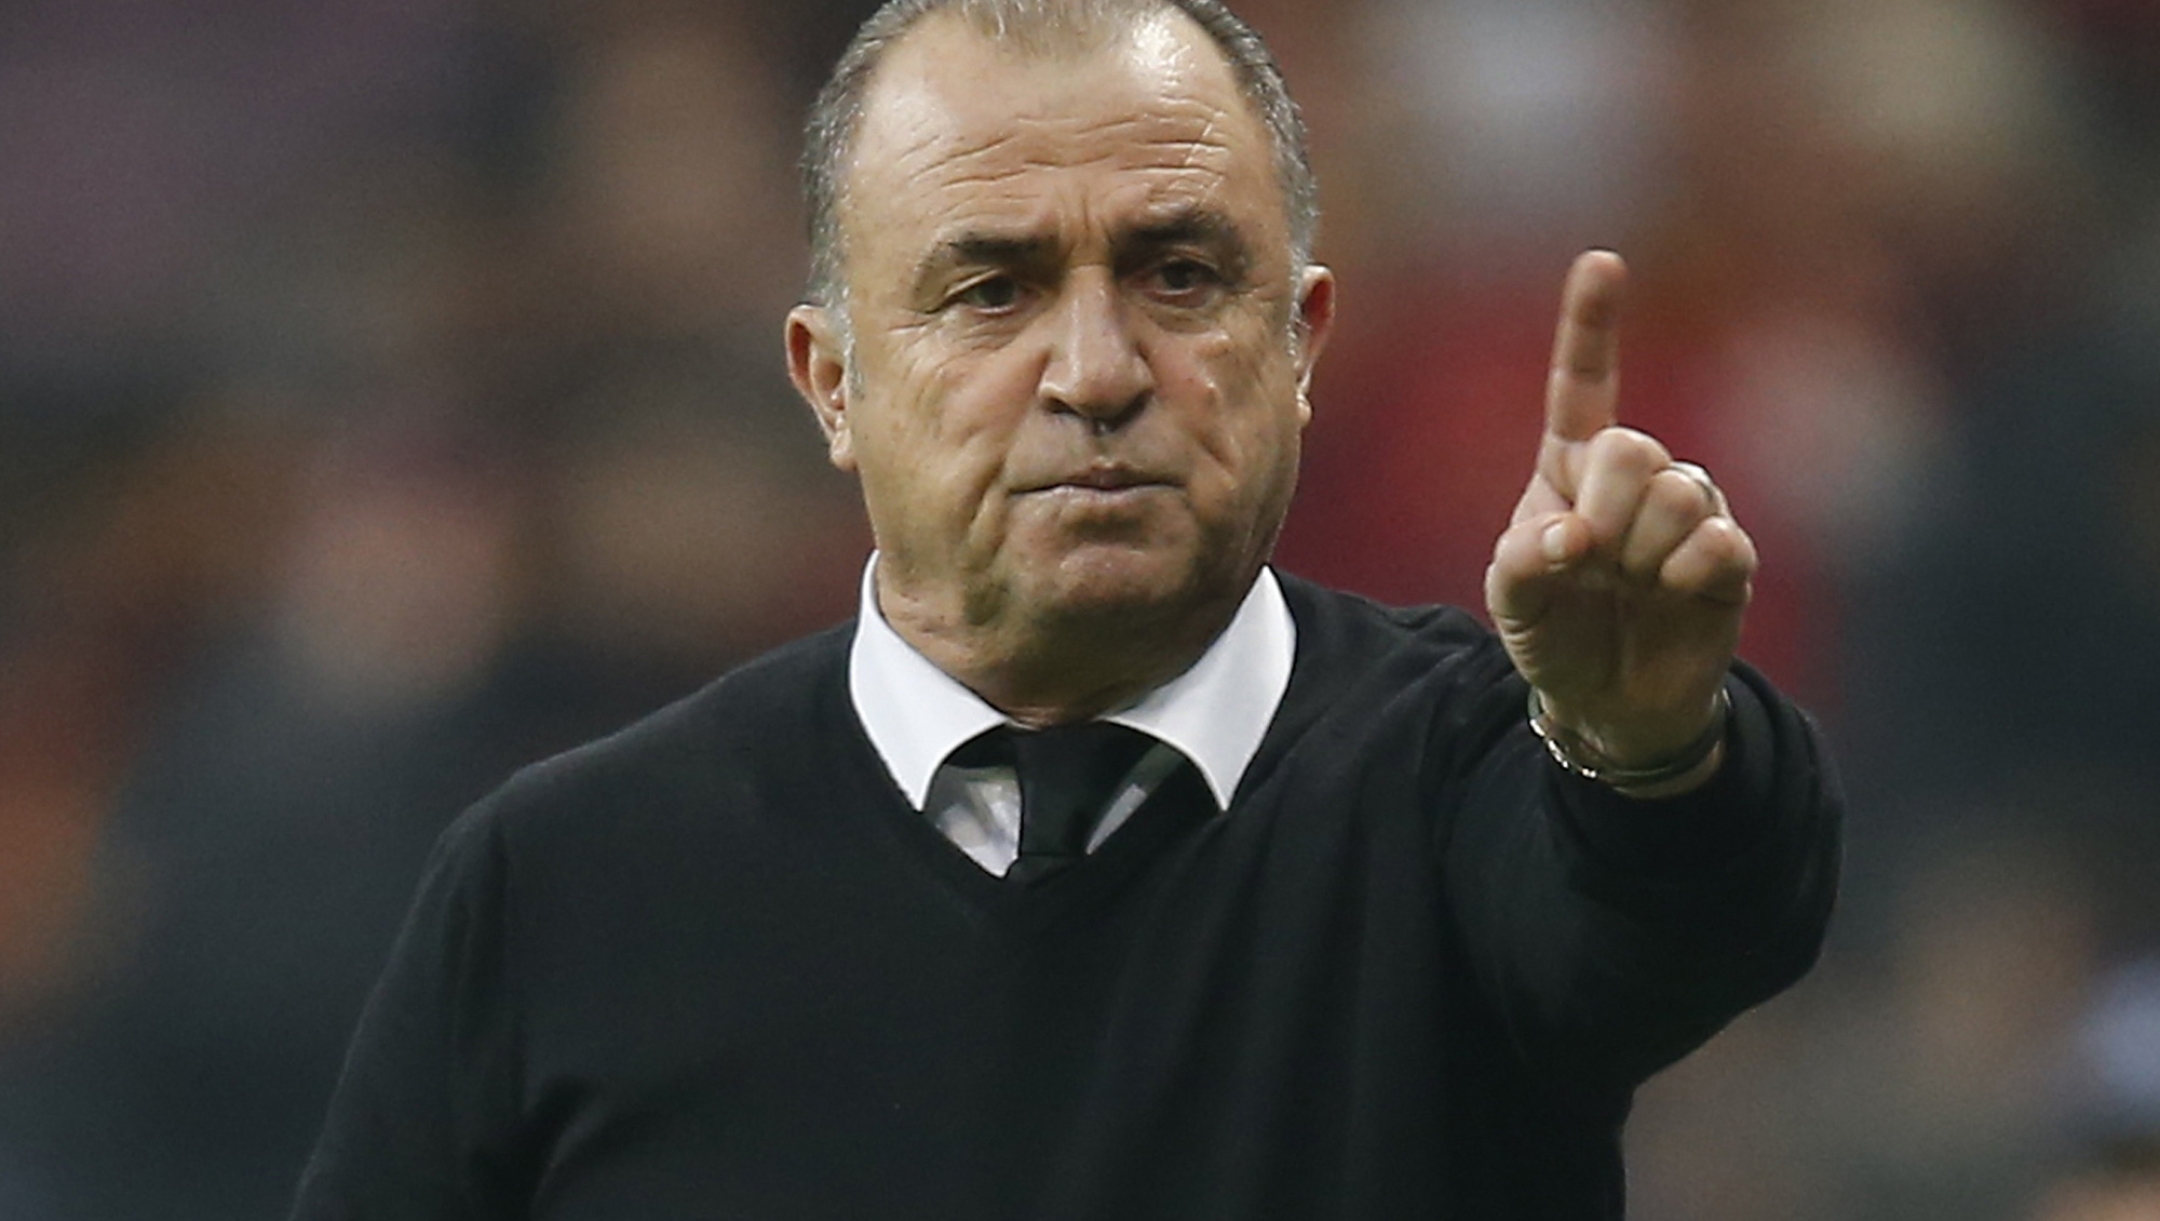 FILE-In this Tuesday, Dec. 11, 2018 file photo, Galatasaray's manager Fatih Terim,  gives instructions to his players during the Champions League Group D soccer match between Galatasaray and Porto in Istanbul. Terim, 66, announced on Twitter on Monday, March 23, 2020 that he has tested positive for the new coronavirus. Earlier, Galatasaray's deputy president Abdurrahman Albayrak also tested positive for the virus. (AP Photo/Lefteris Pitarakis,File)